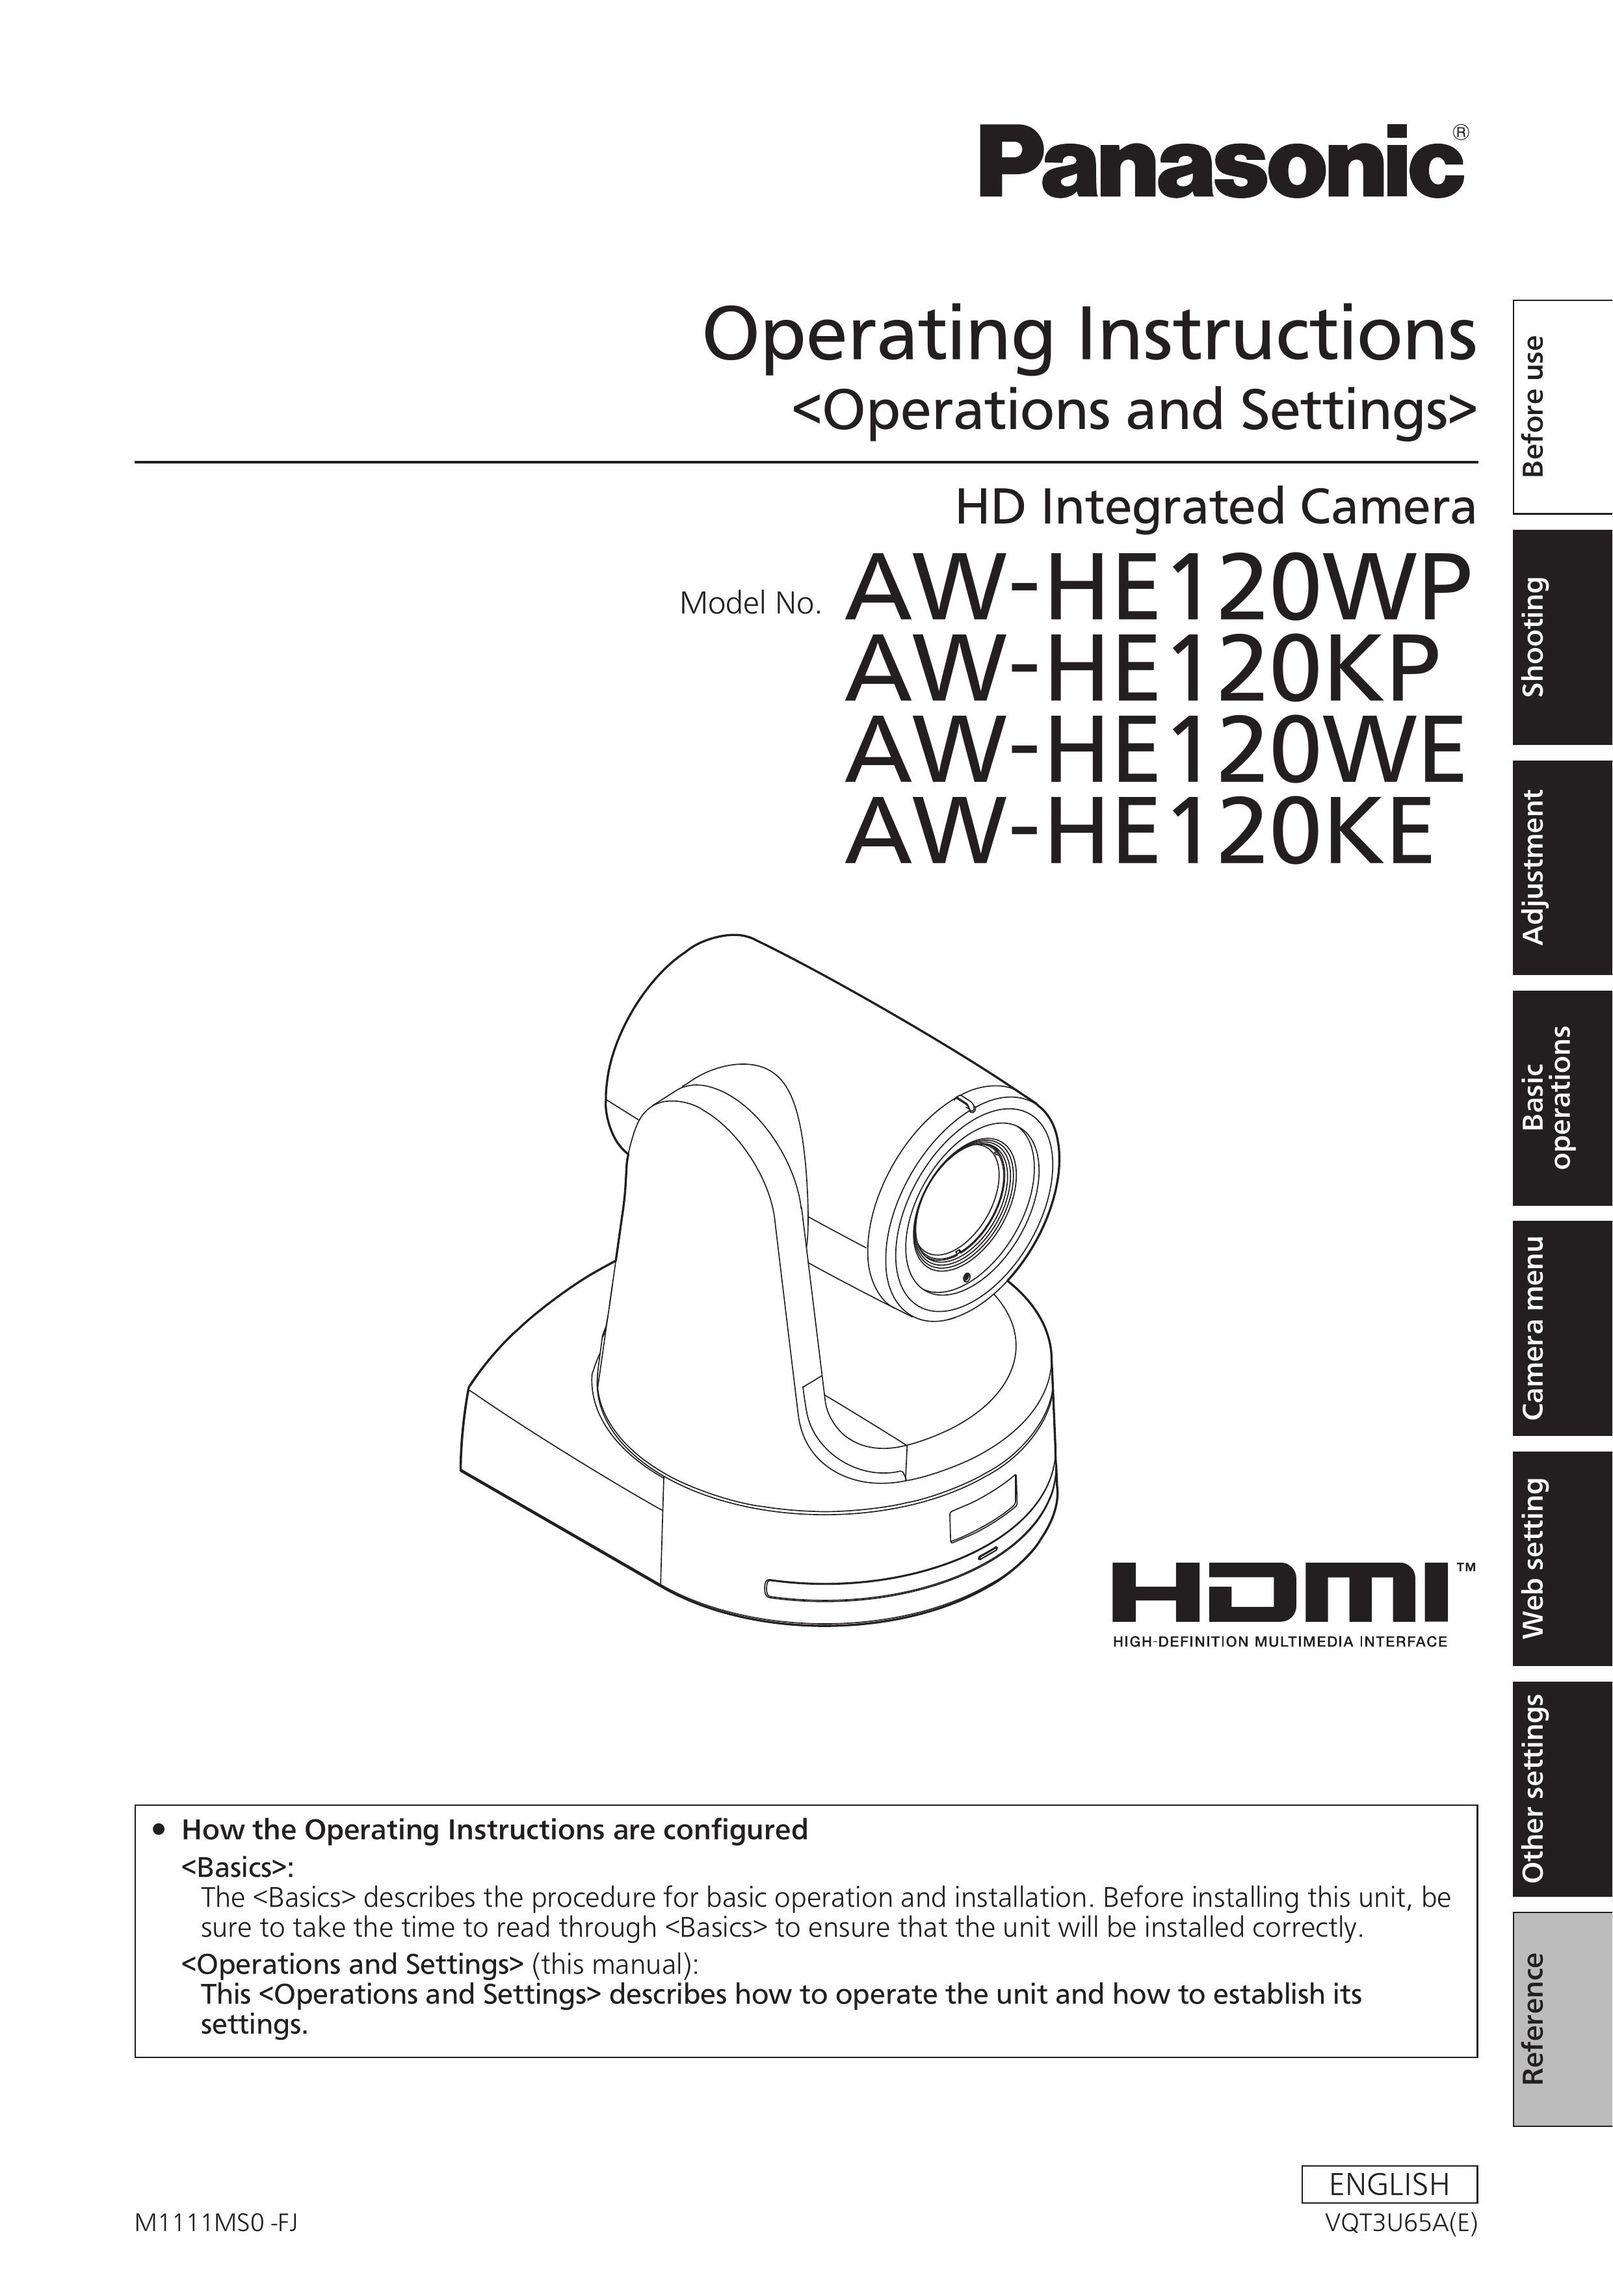 Panasonic AW-HE120WP Home Security System User Manual